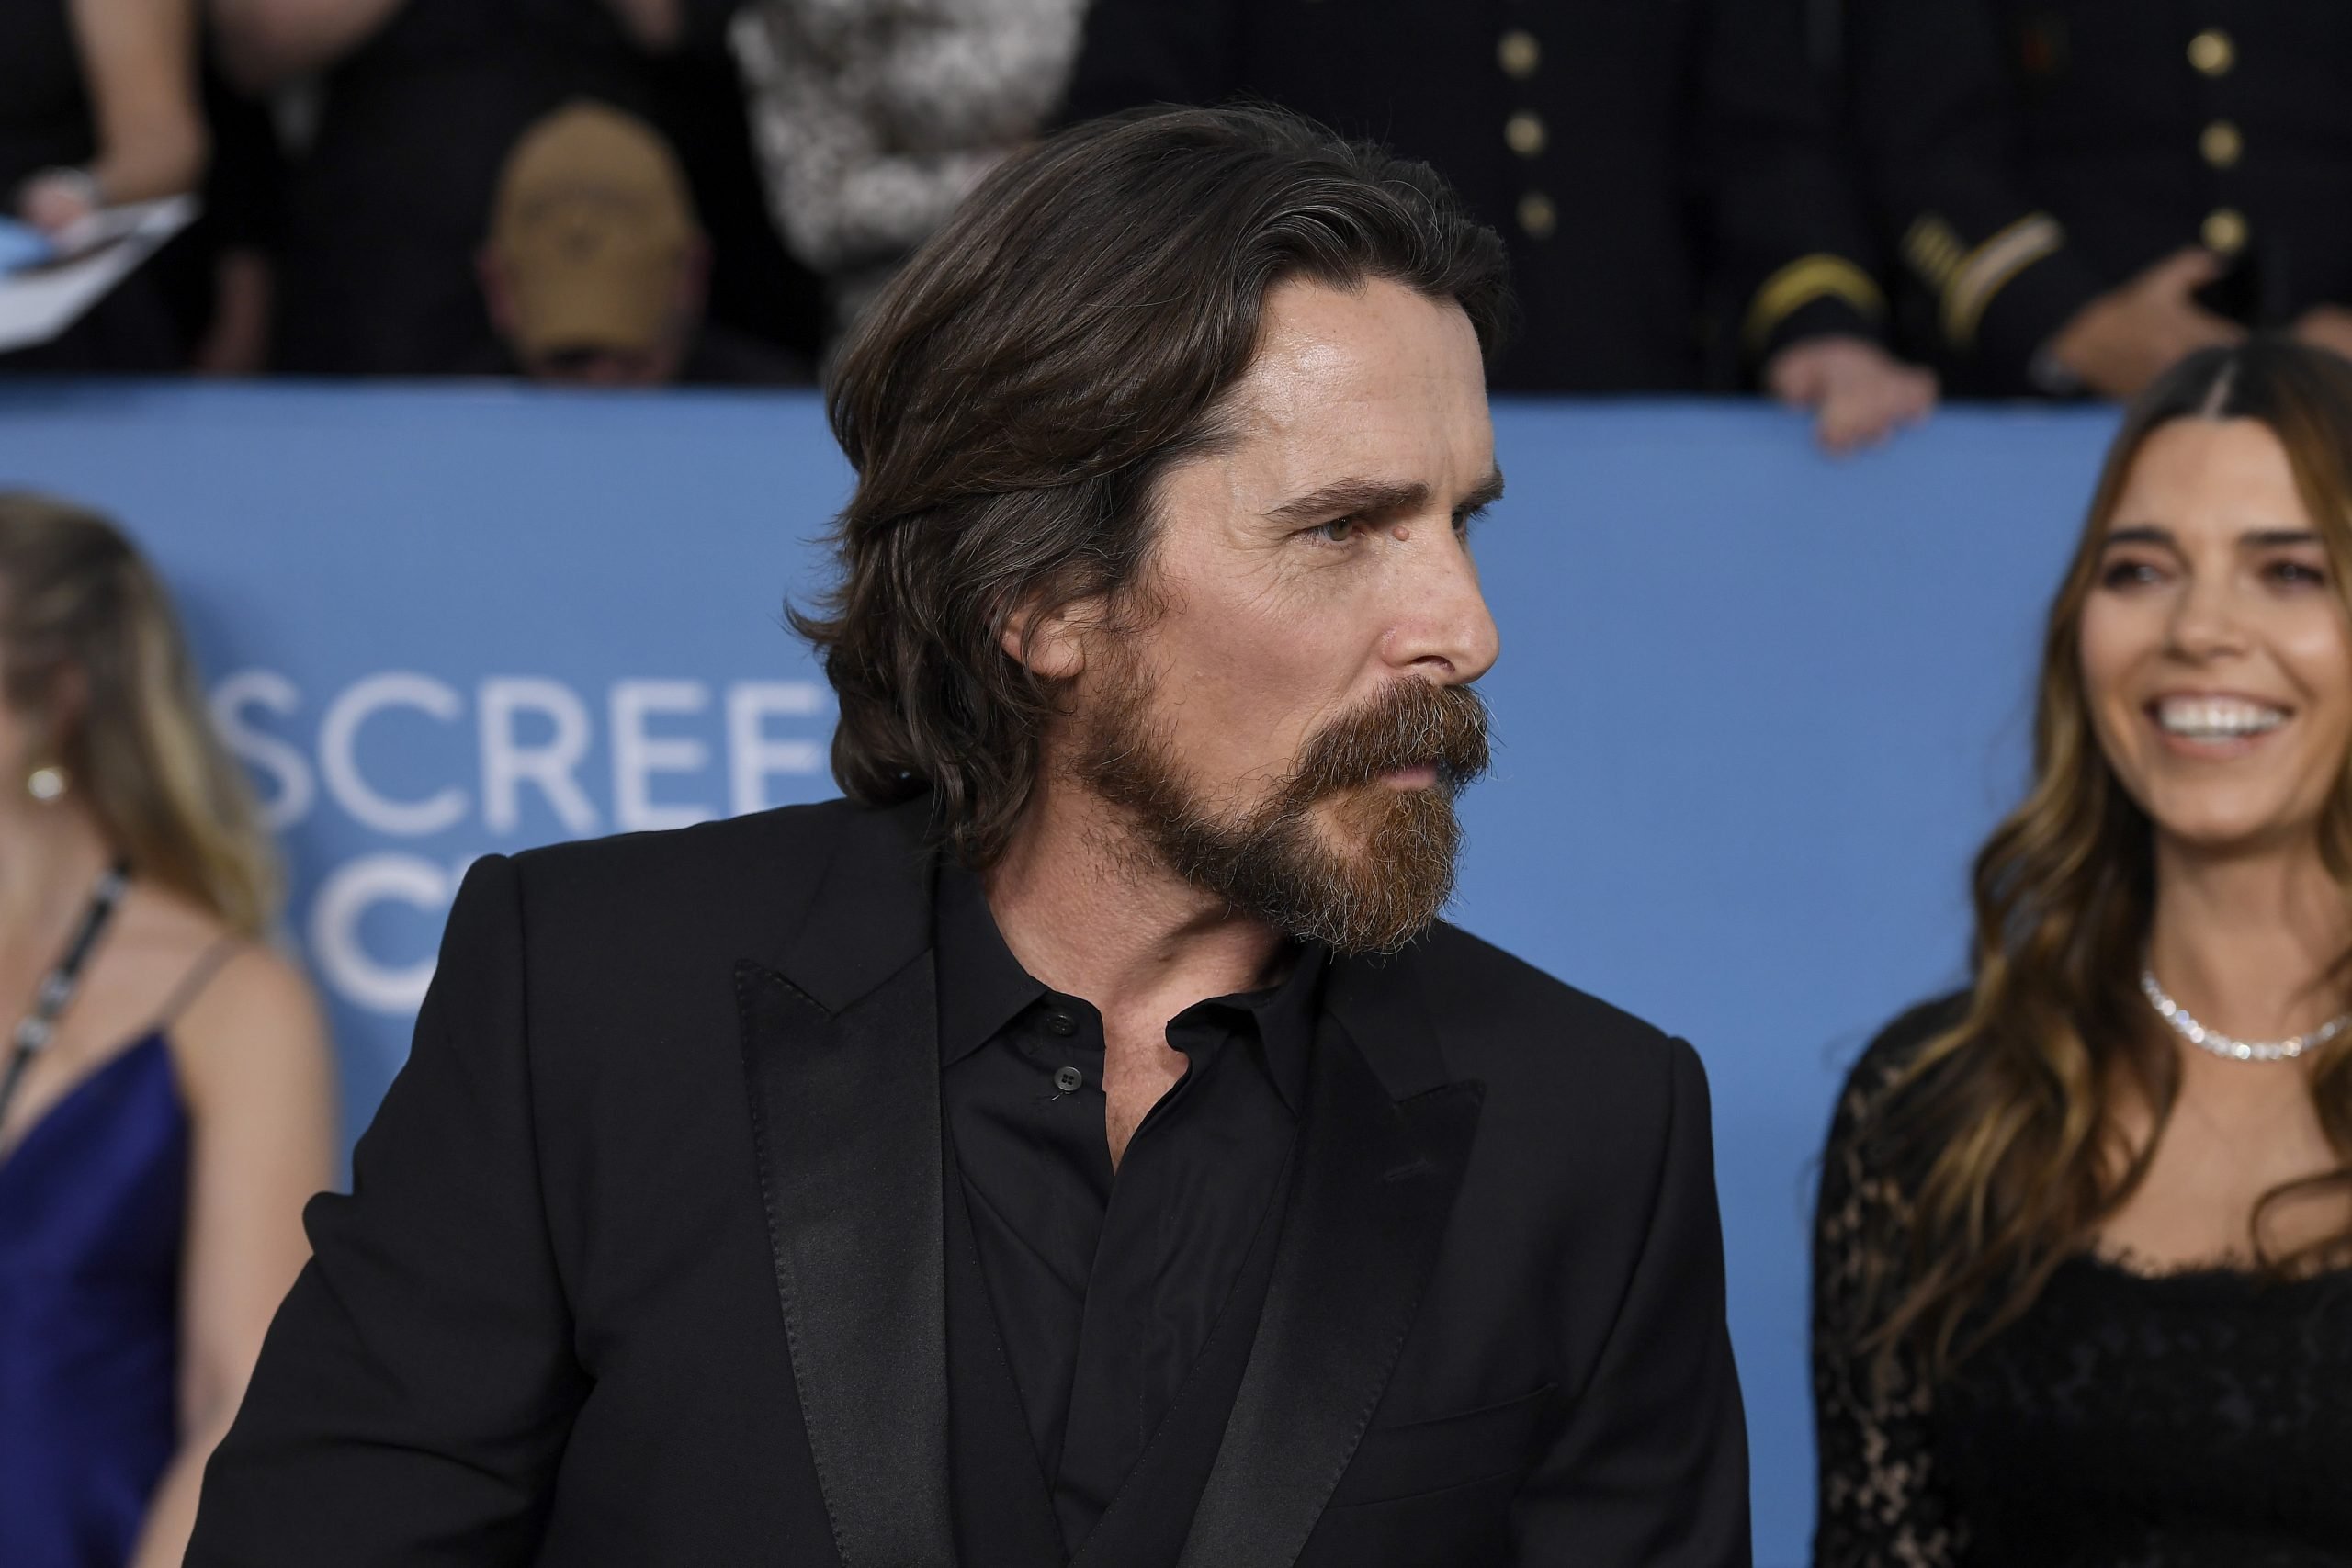 Christian Bale, who plays Gorr the God Butcher in Thor: Love and Thunder, attends the 26th annual Screen Actor Guild Awards